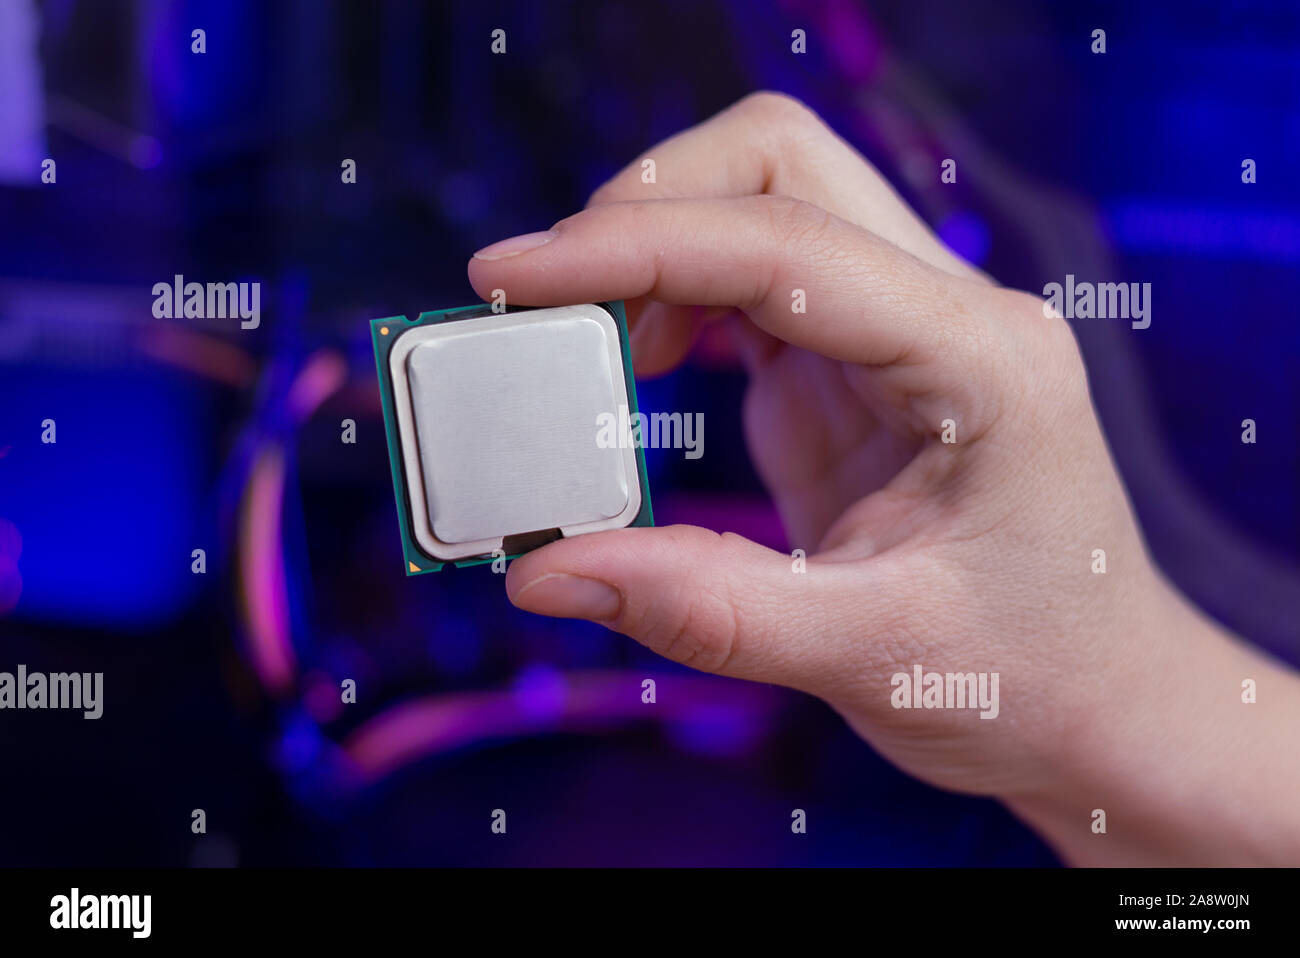 Hand holds a modern processor. Computer with RGB illumination in background. Close-up. Stock Photo